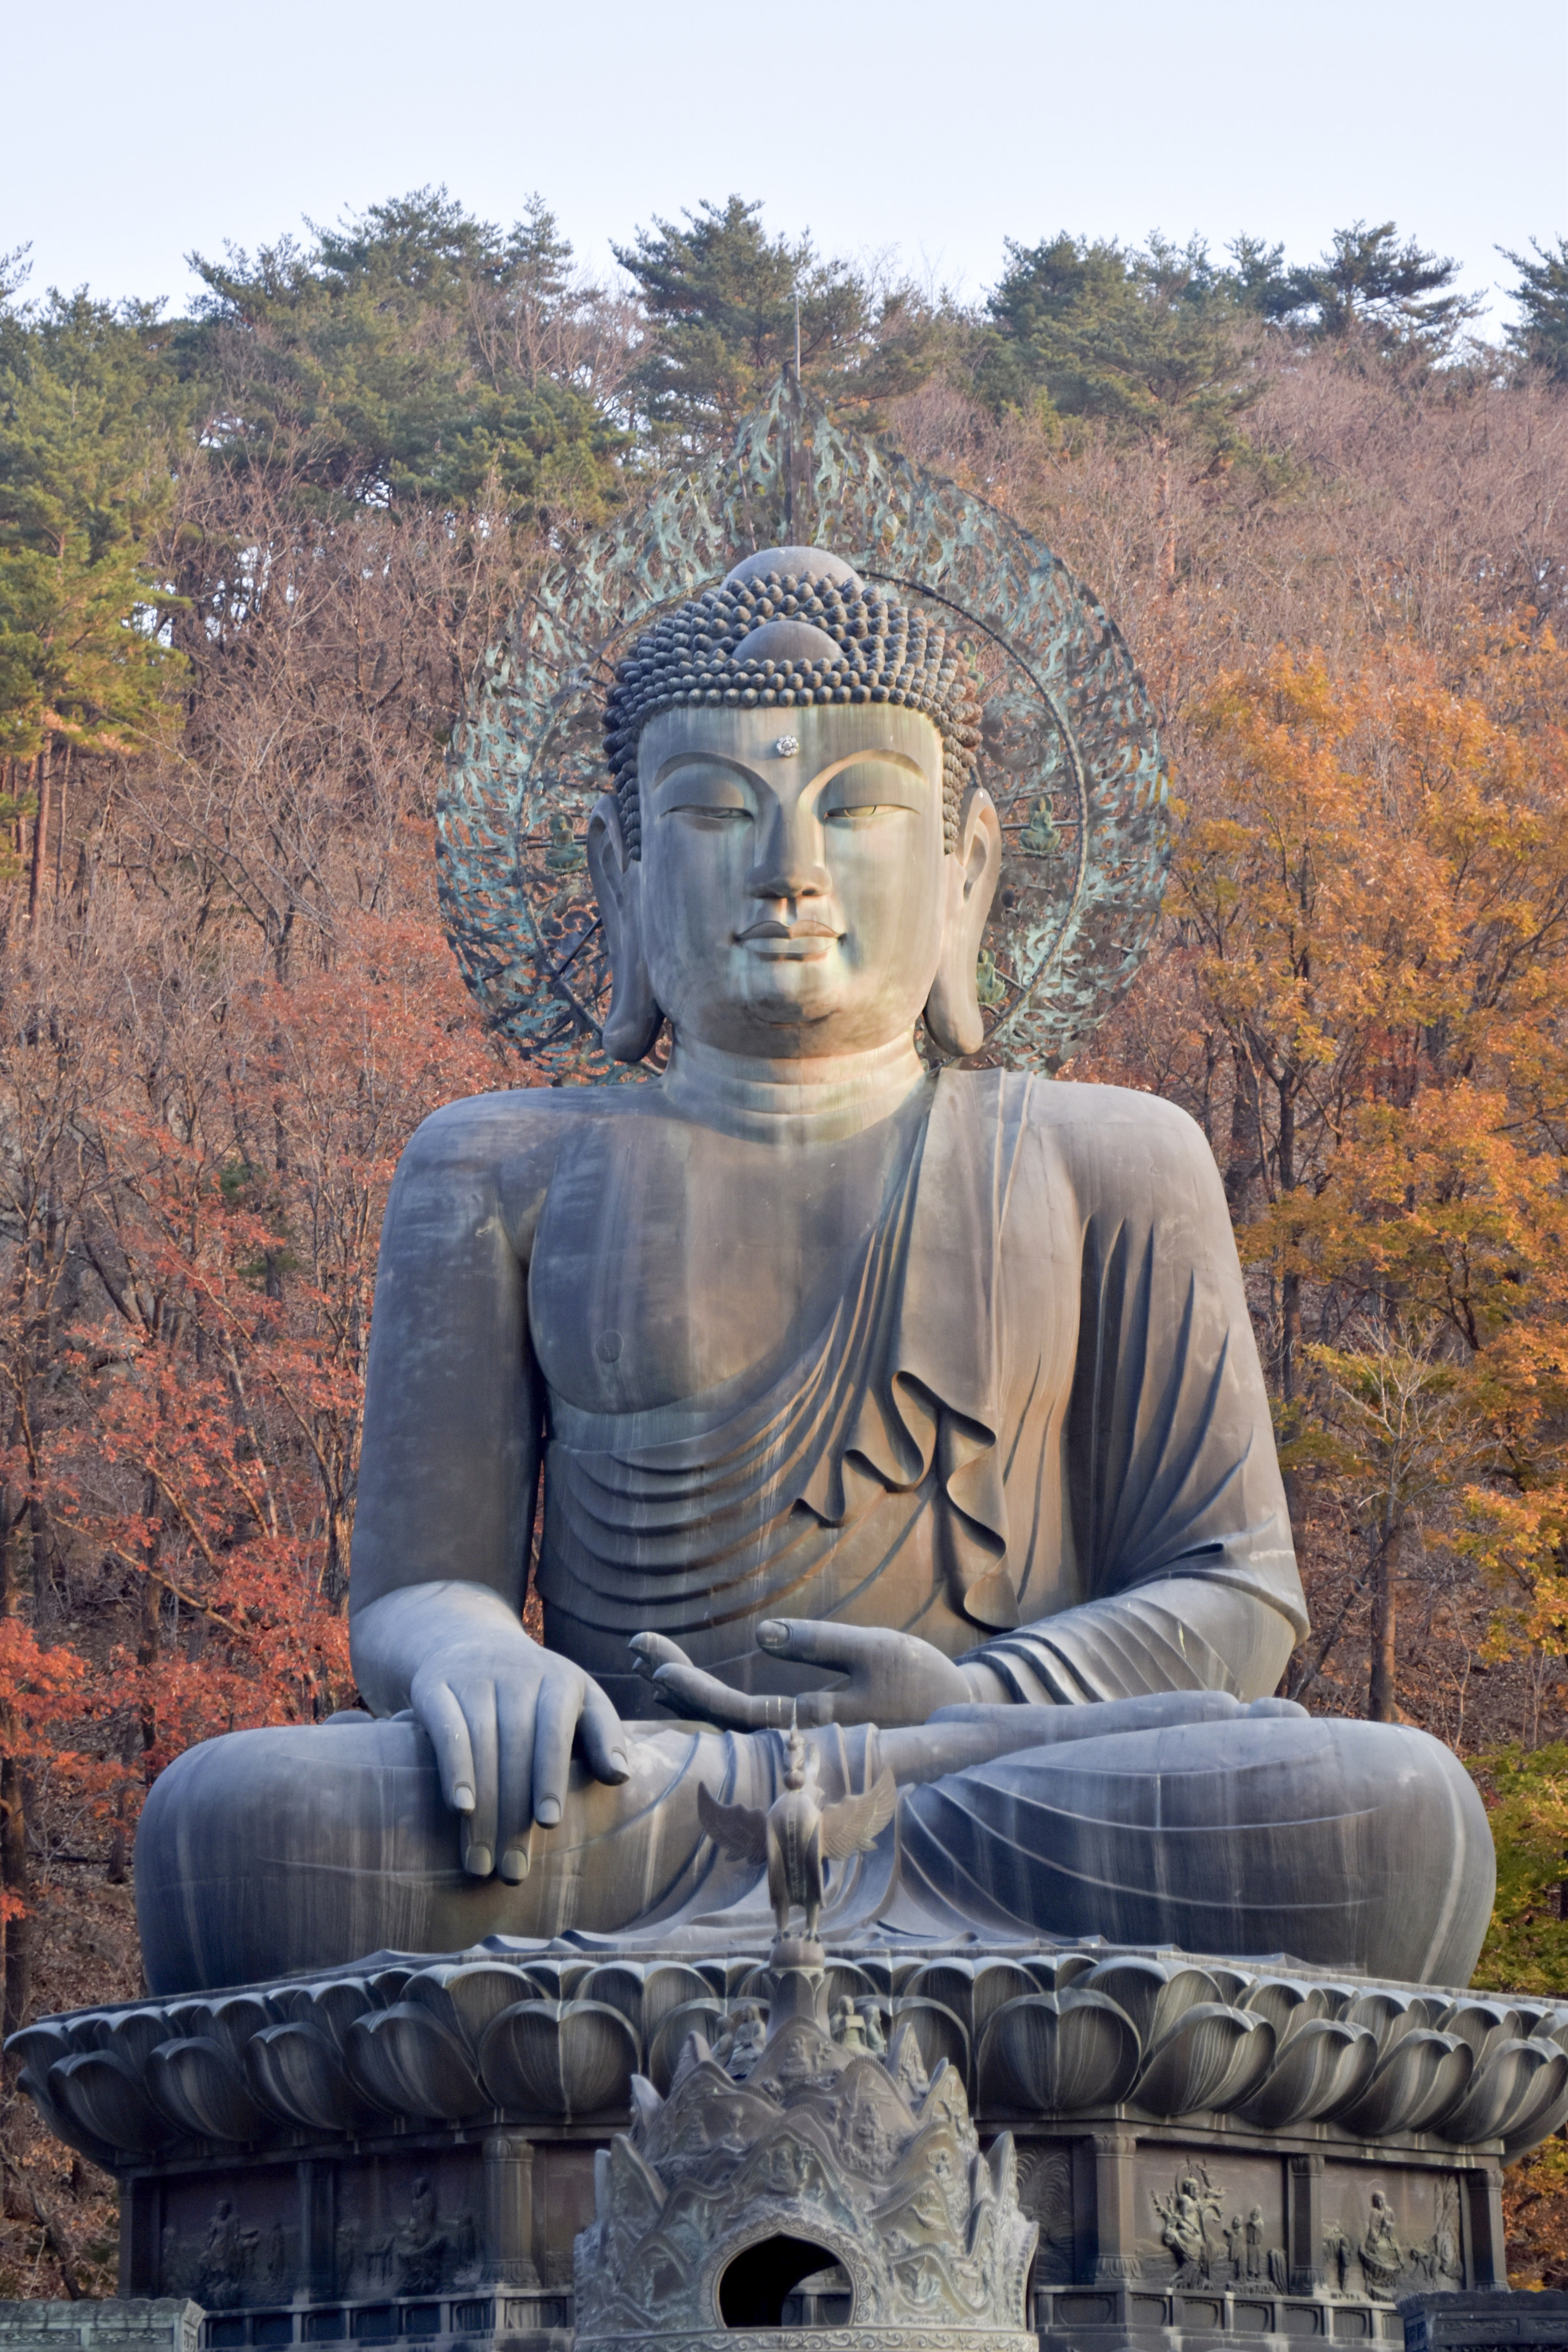 The Great Unification Buddha, called Tongil Daebul, at the Sinheungsa temple in South Korea. Photo: Victoria Burrows